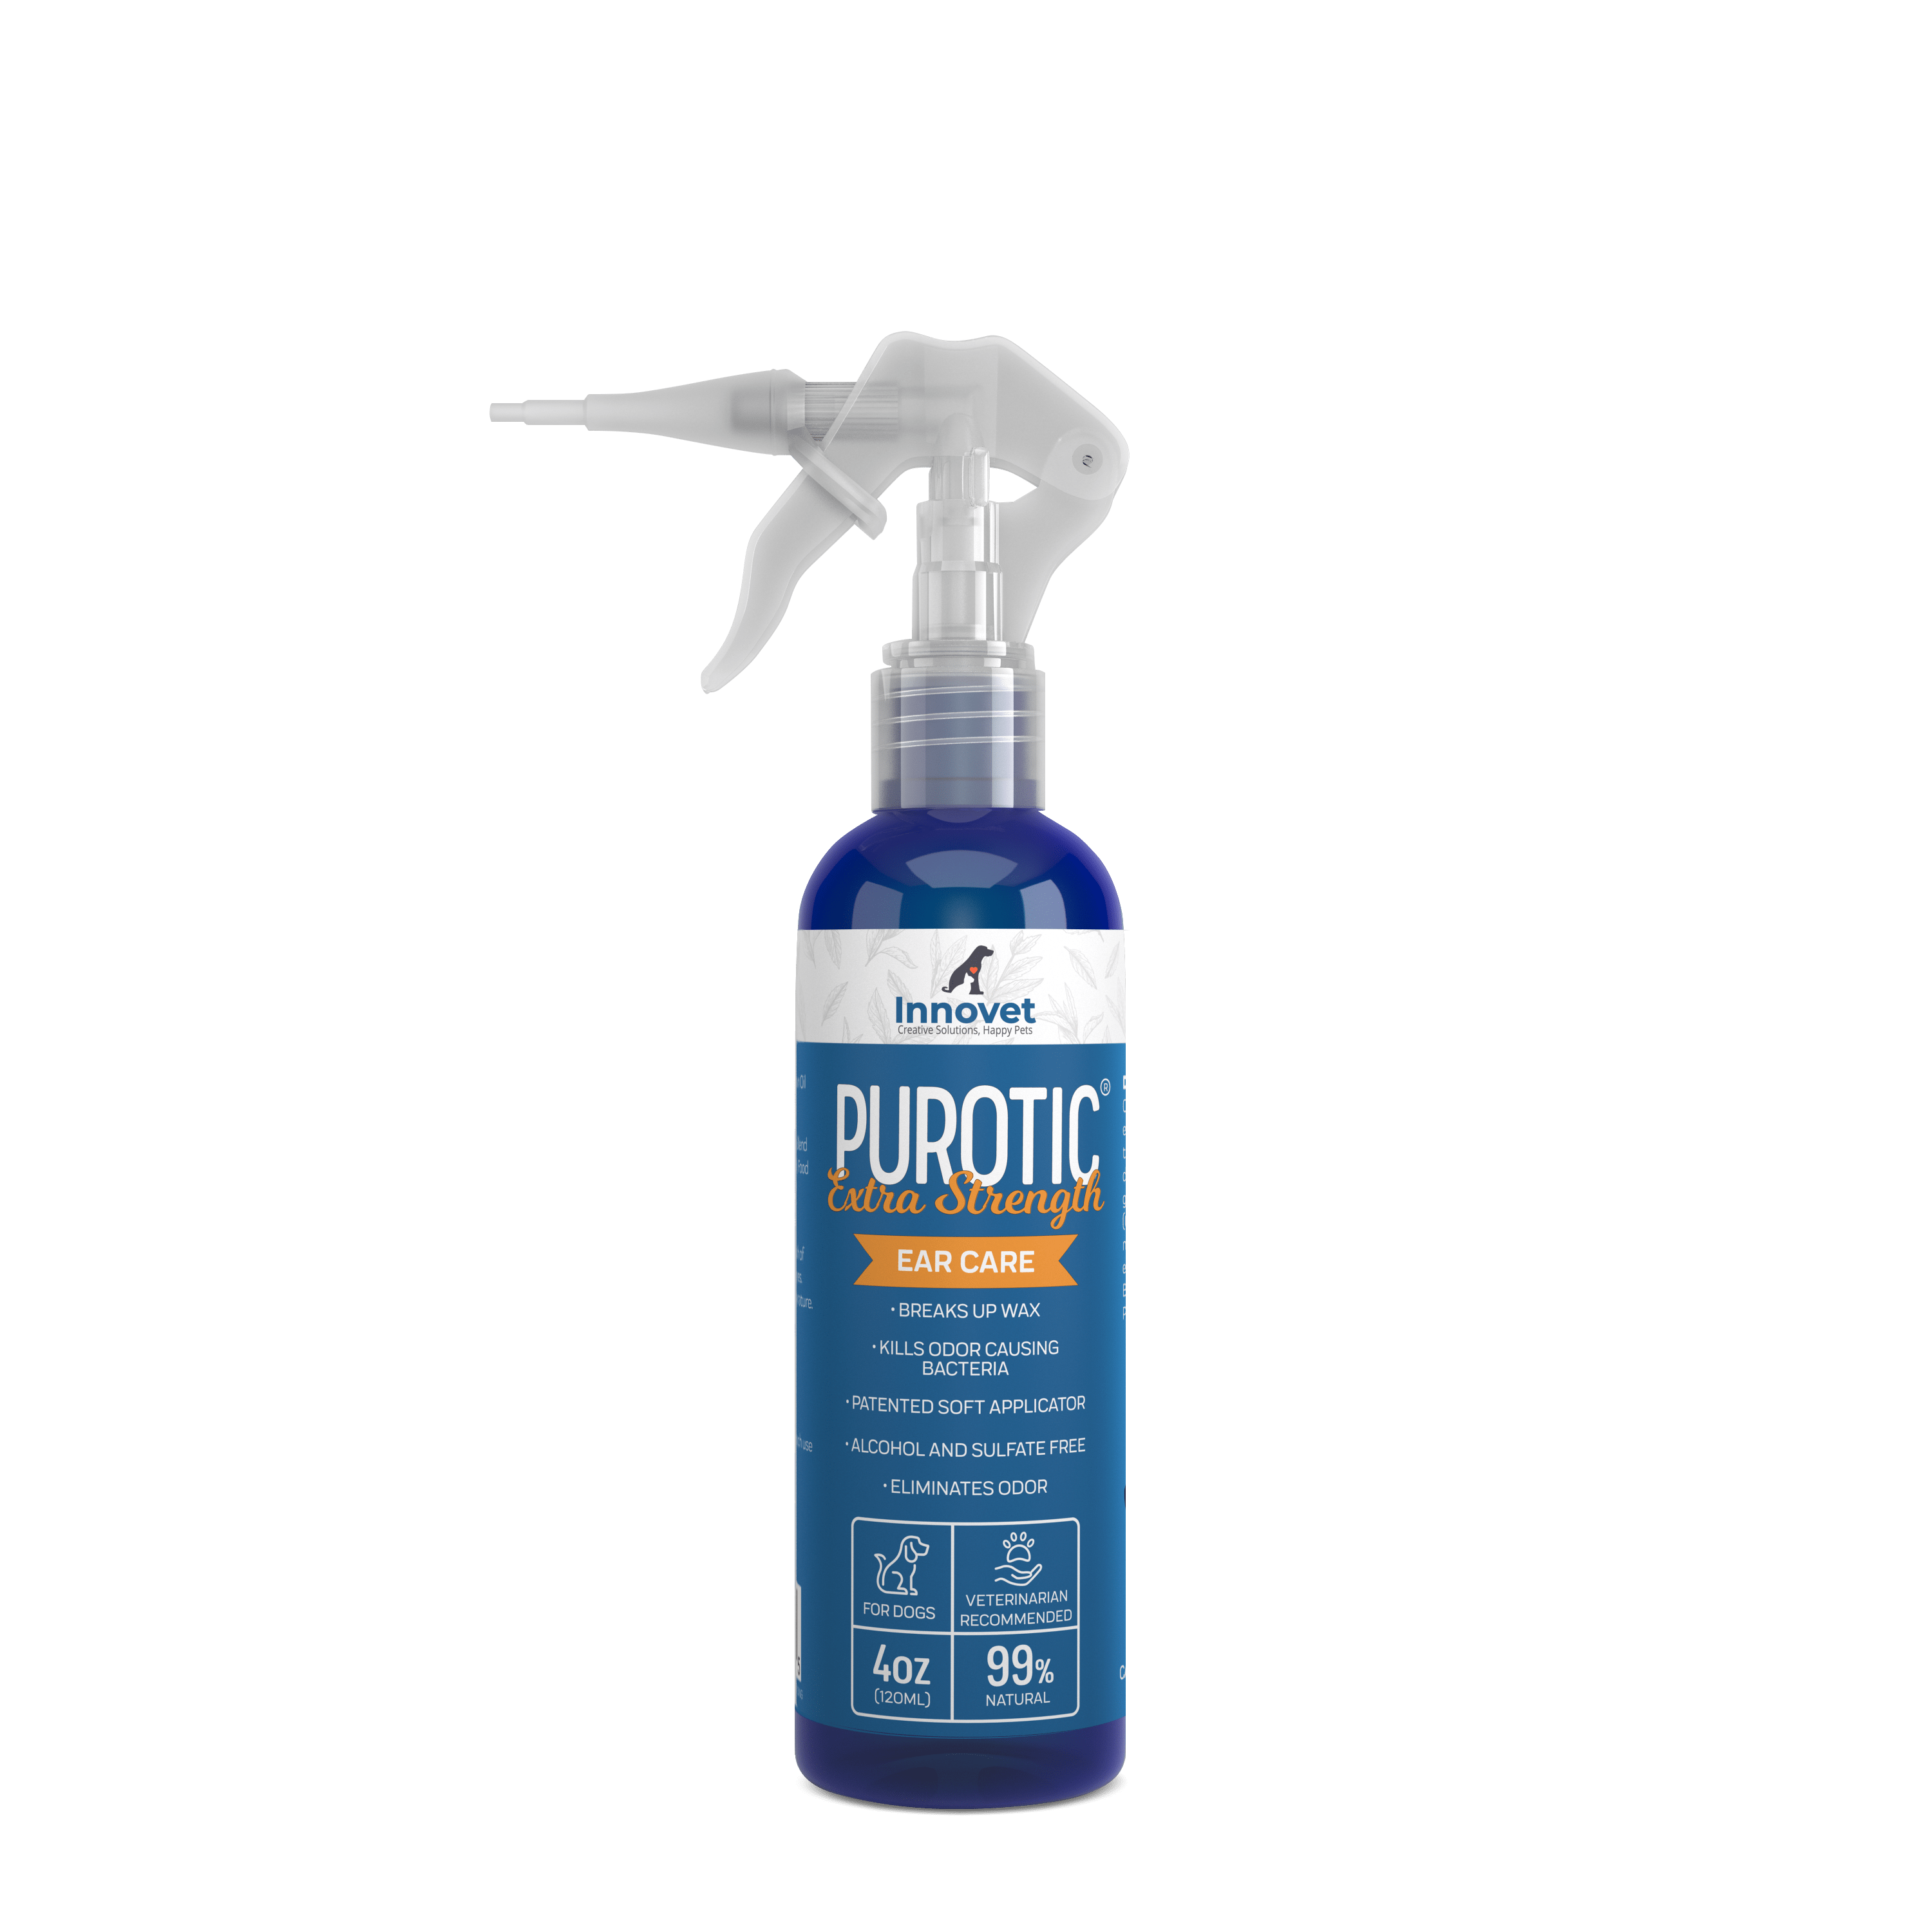 PurOtic Dog Ear Cleaner and Ear Dryer